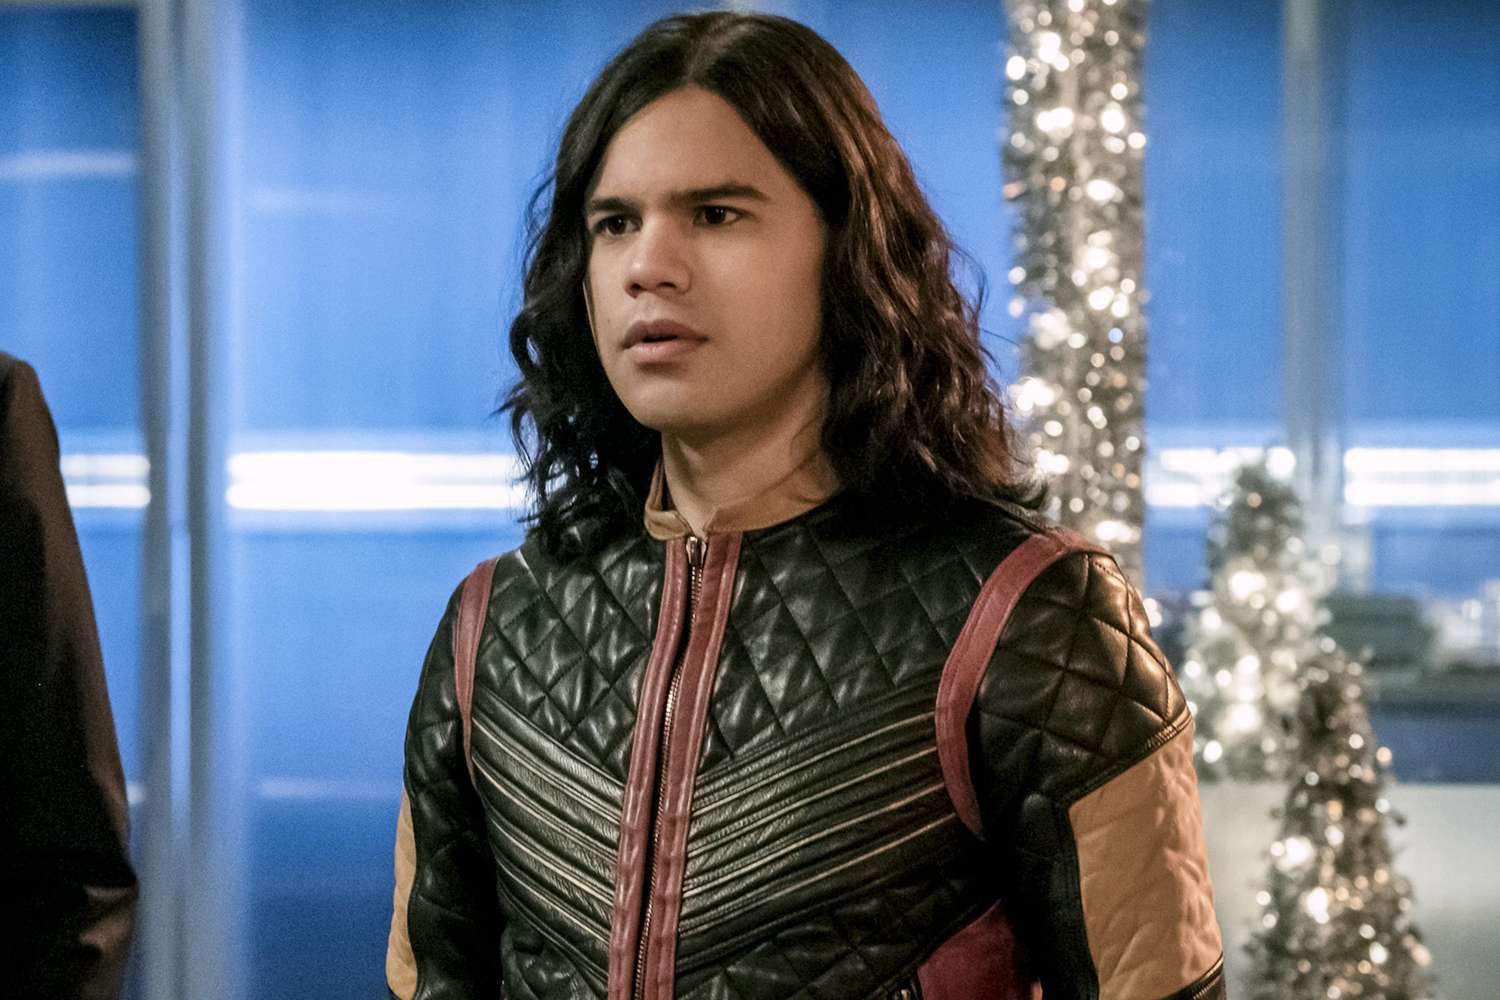 The Flash -- "Don't Run" -- Image Number: FLA409b_0060b.jpg -- Pictured (L-R): Hartley Sawyer as Dibny and Carlos Valdes as Cisco Ramon/Vibe -- Photo: Katie Yu/The CW -- © 2017 The CW Network, LLC. All rights reserved.